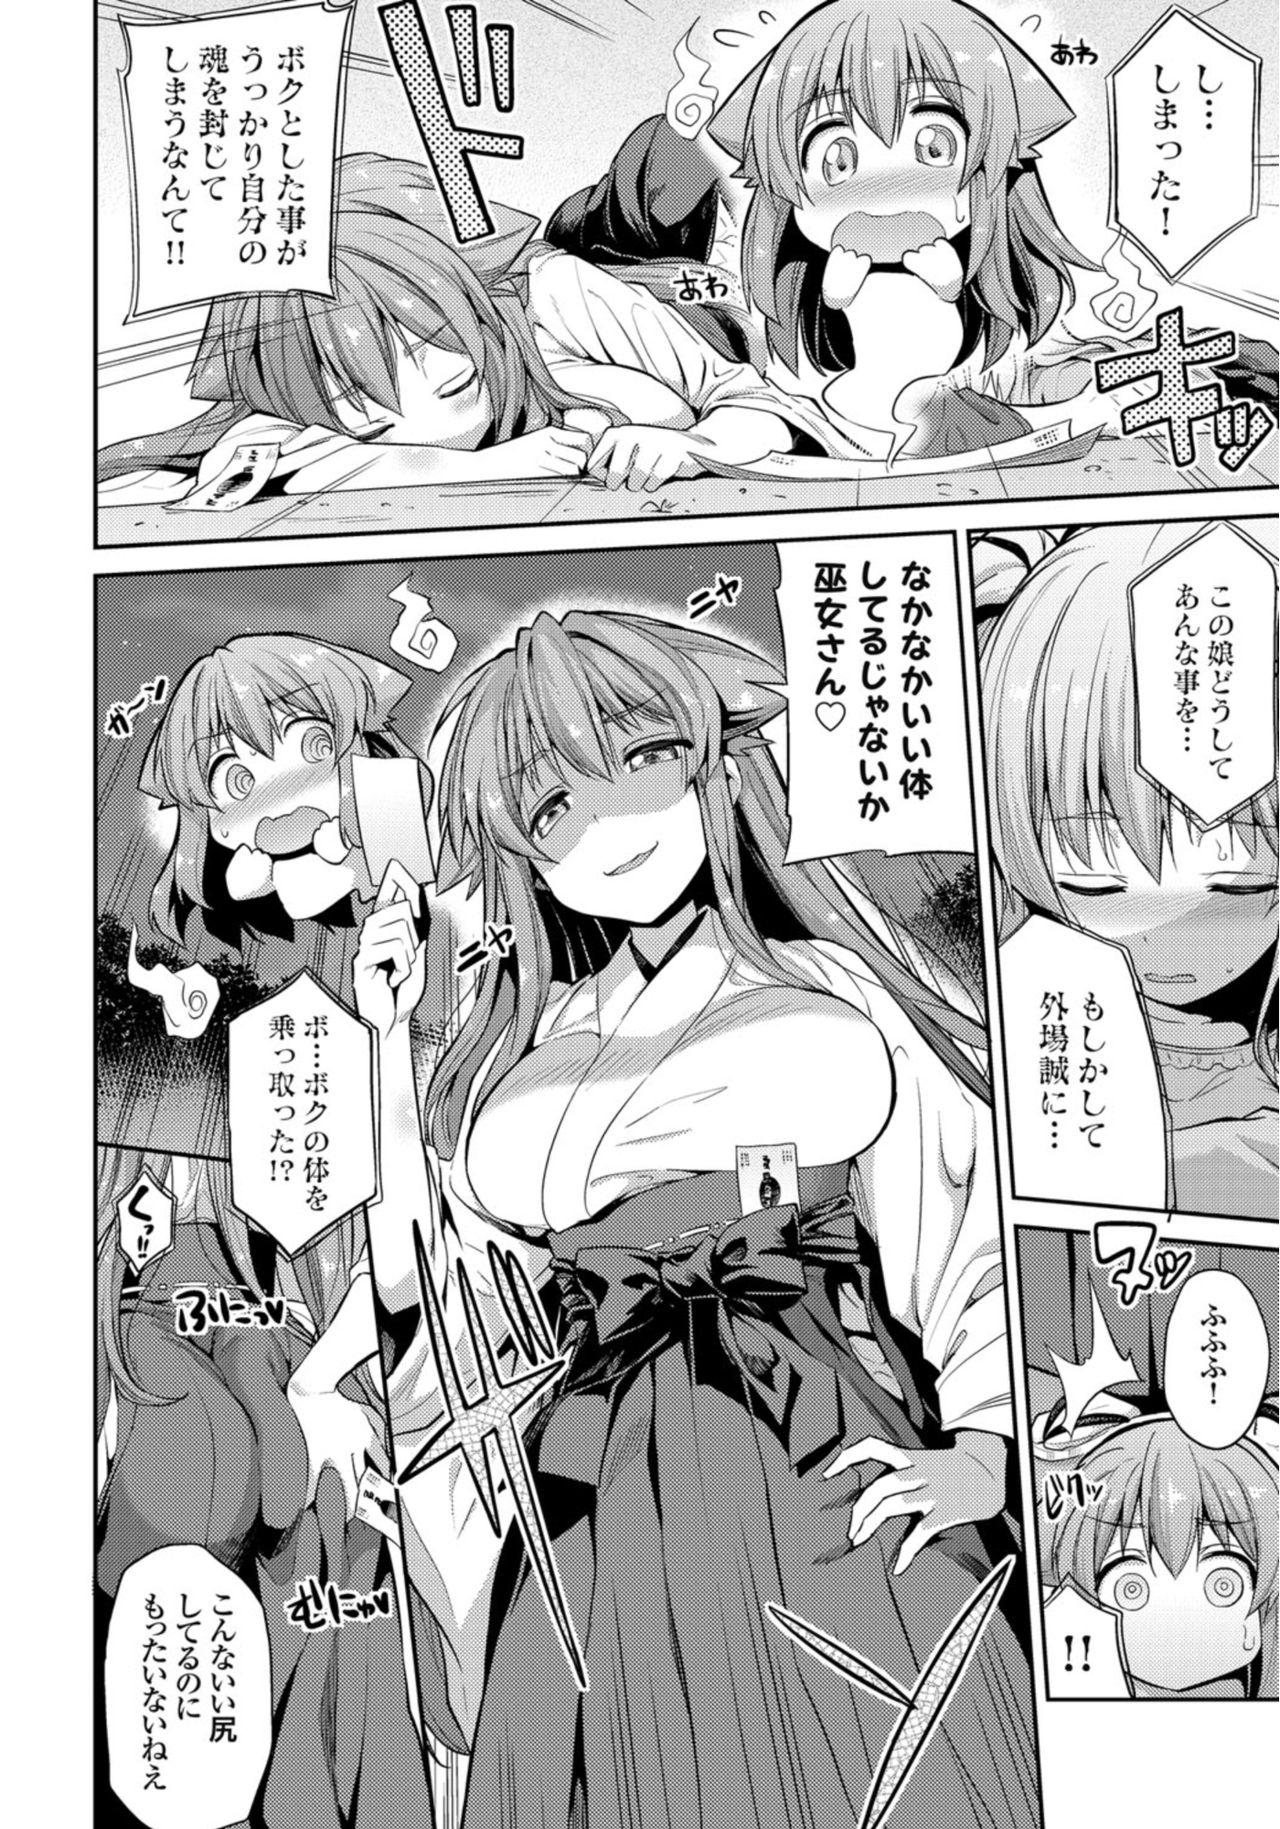 College 憑りつき×乗っ取り×孕ませろ！肆憑き 〜ドロリ濃厚！退魔巫女種付けレイプ！〜 Glam - Page 4